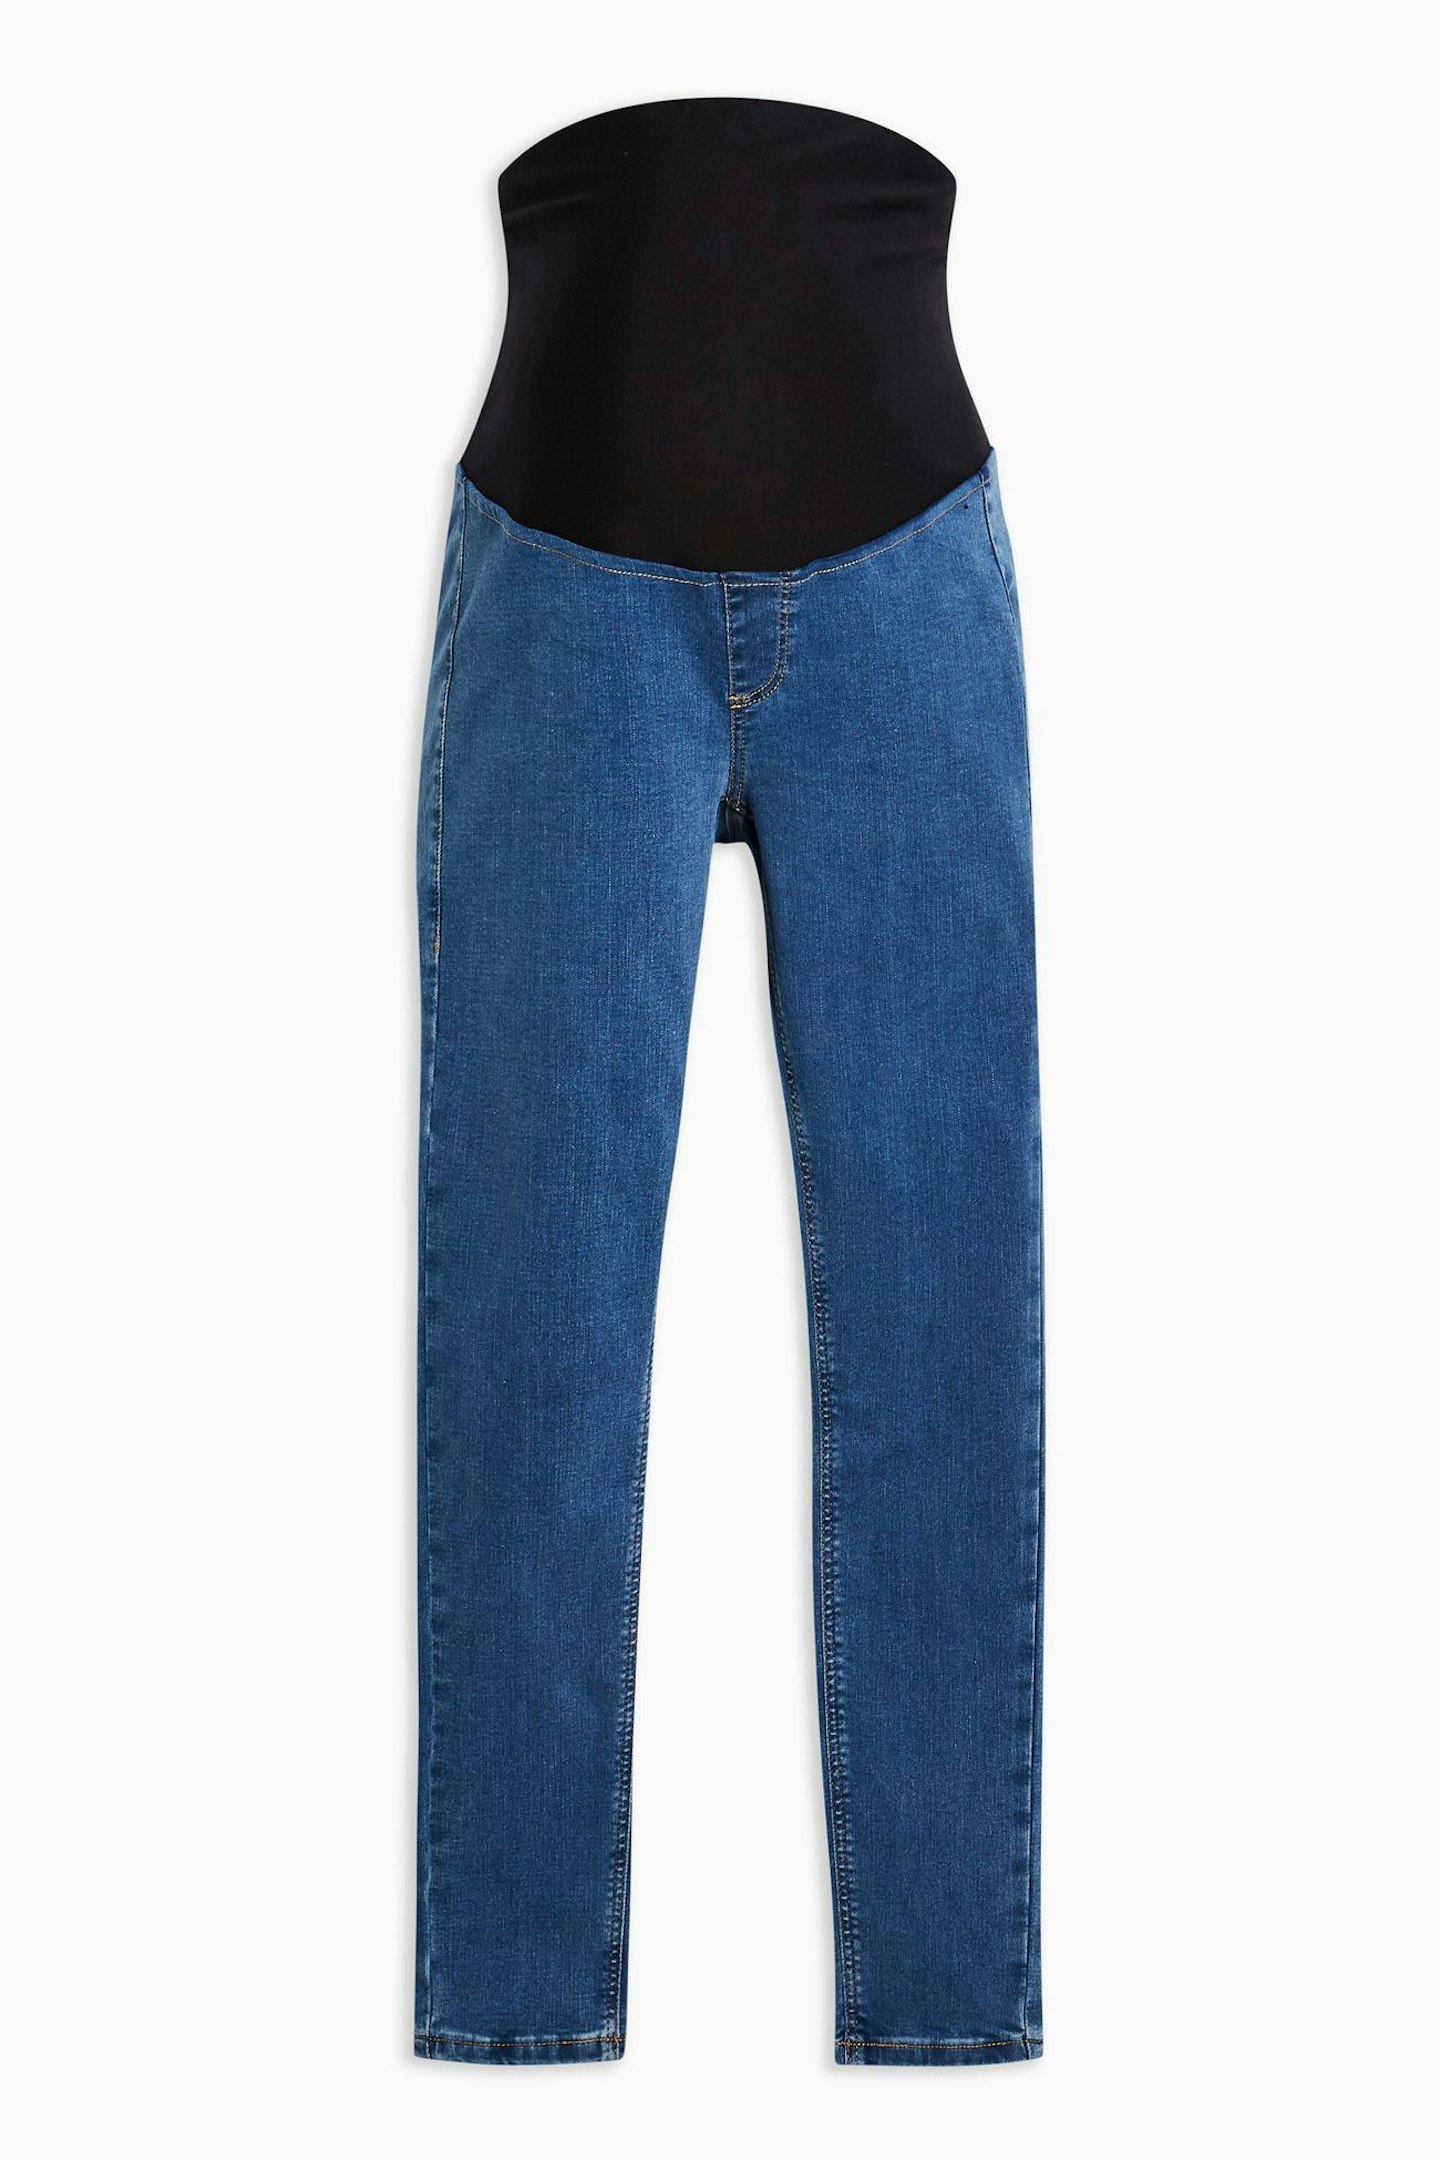 Over the bump mid-stone joni jeans